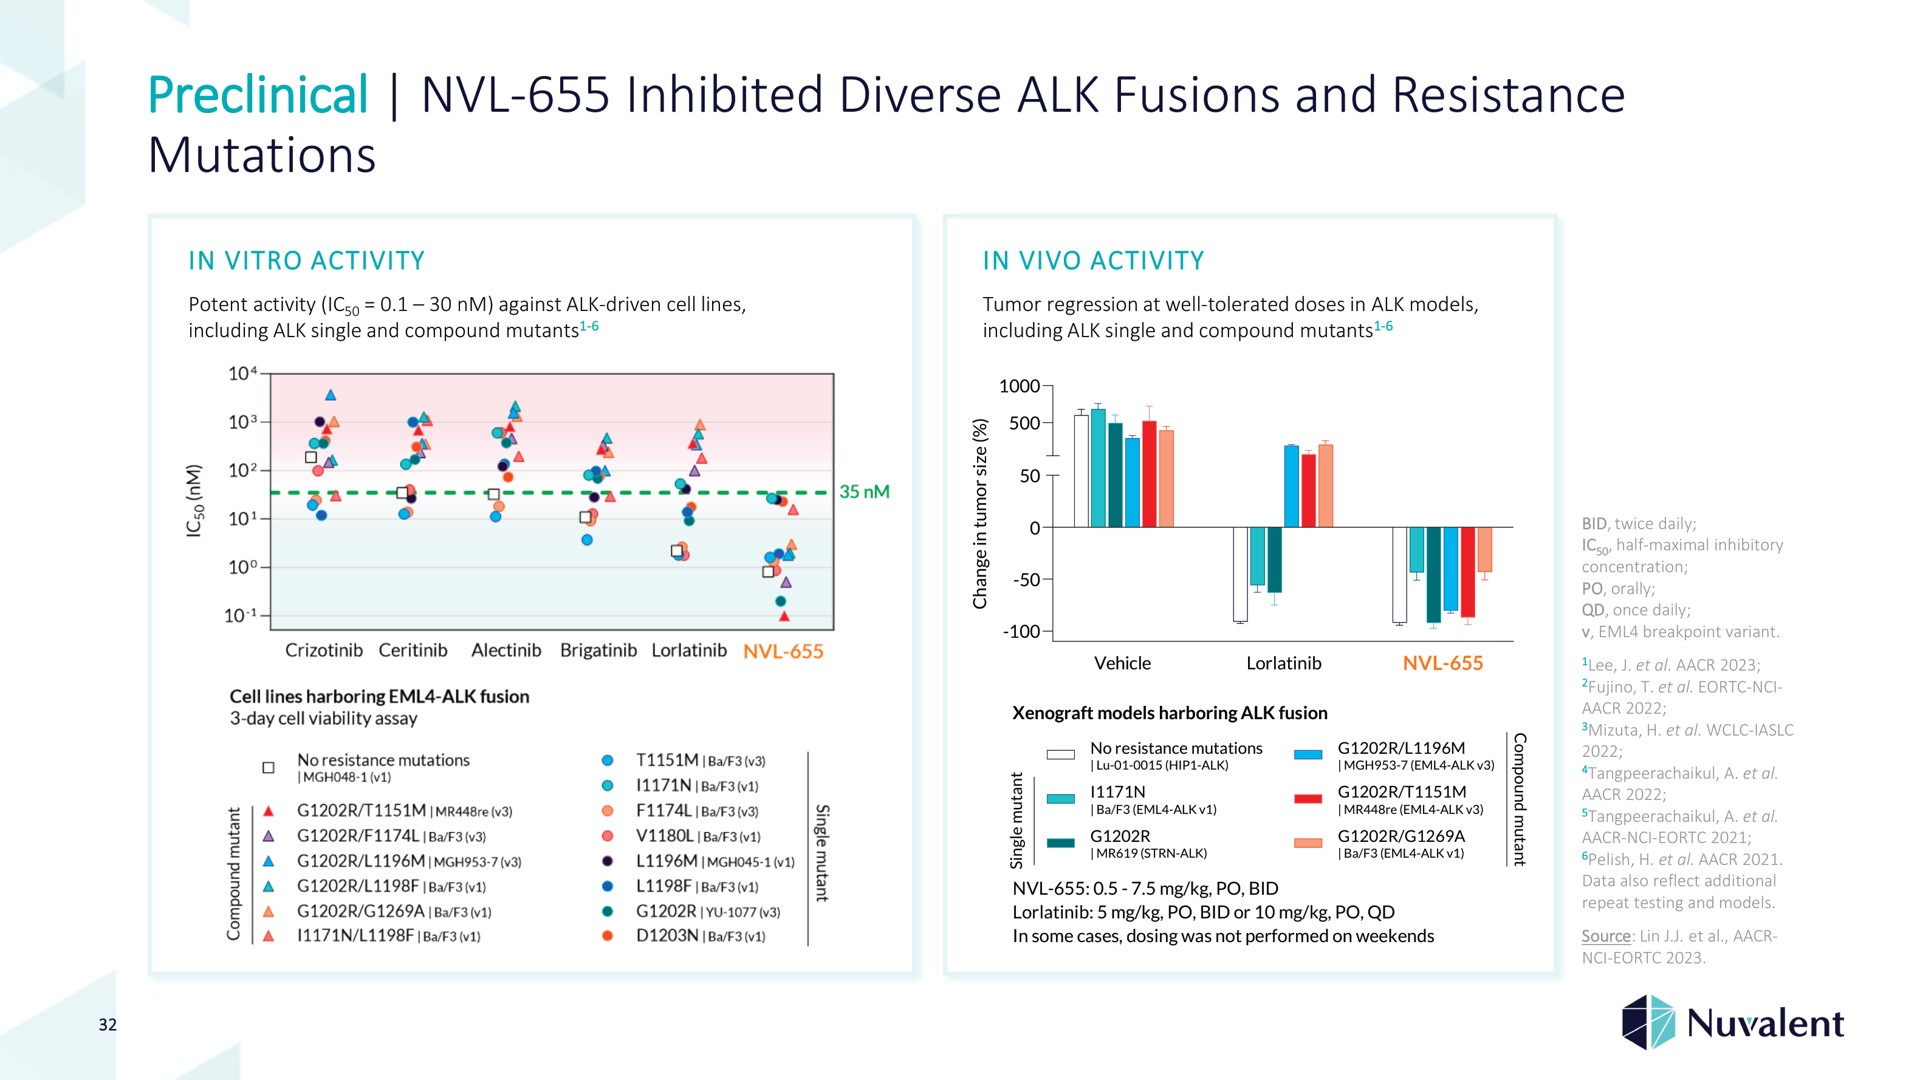 preclinical inhibited diverse alk fusions and resistance mutations | Nuvalent